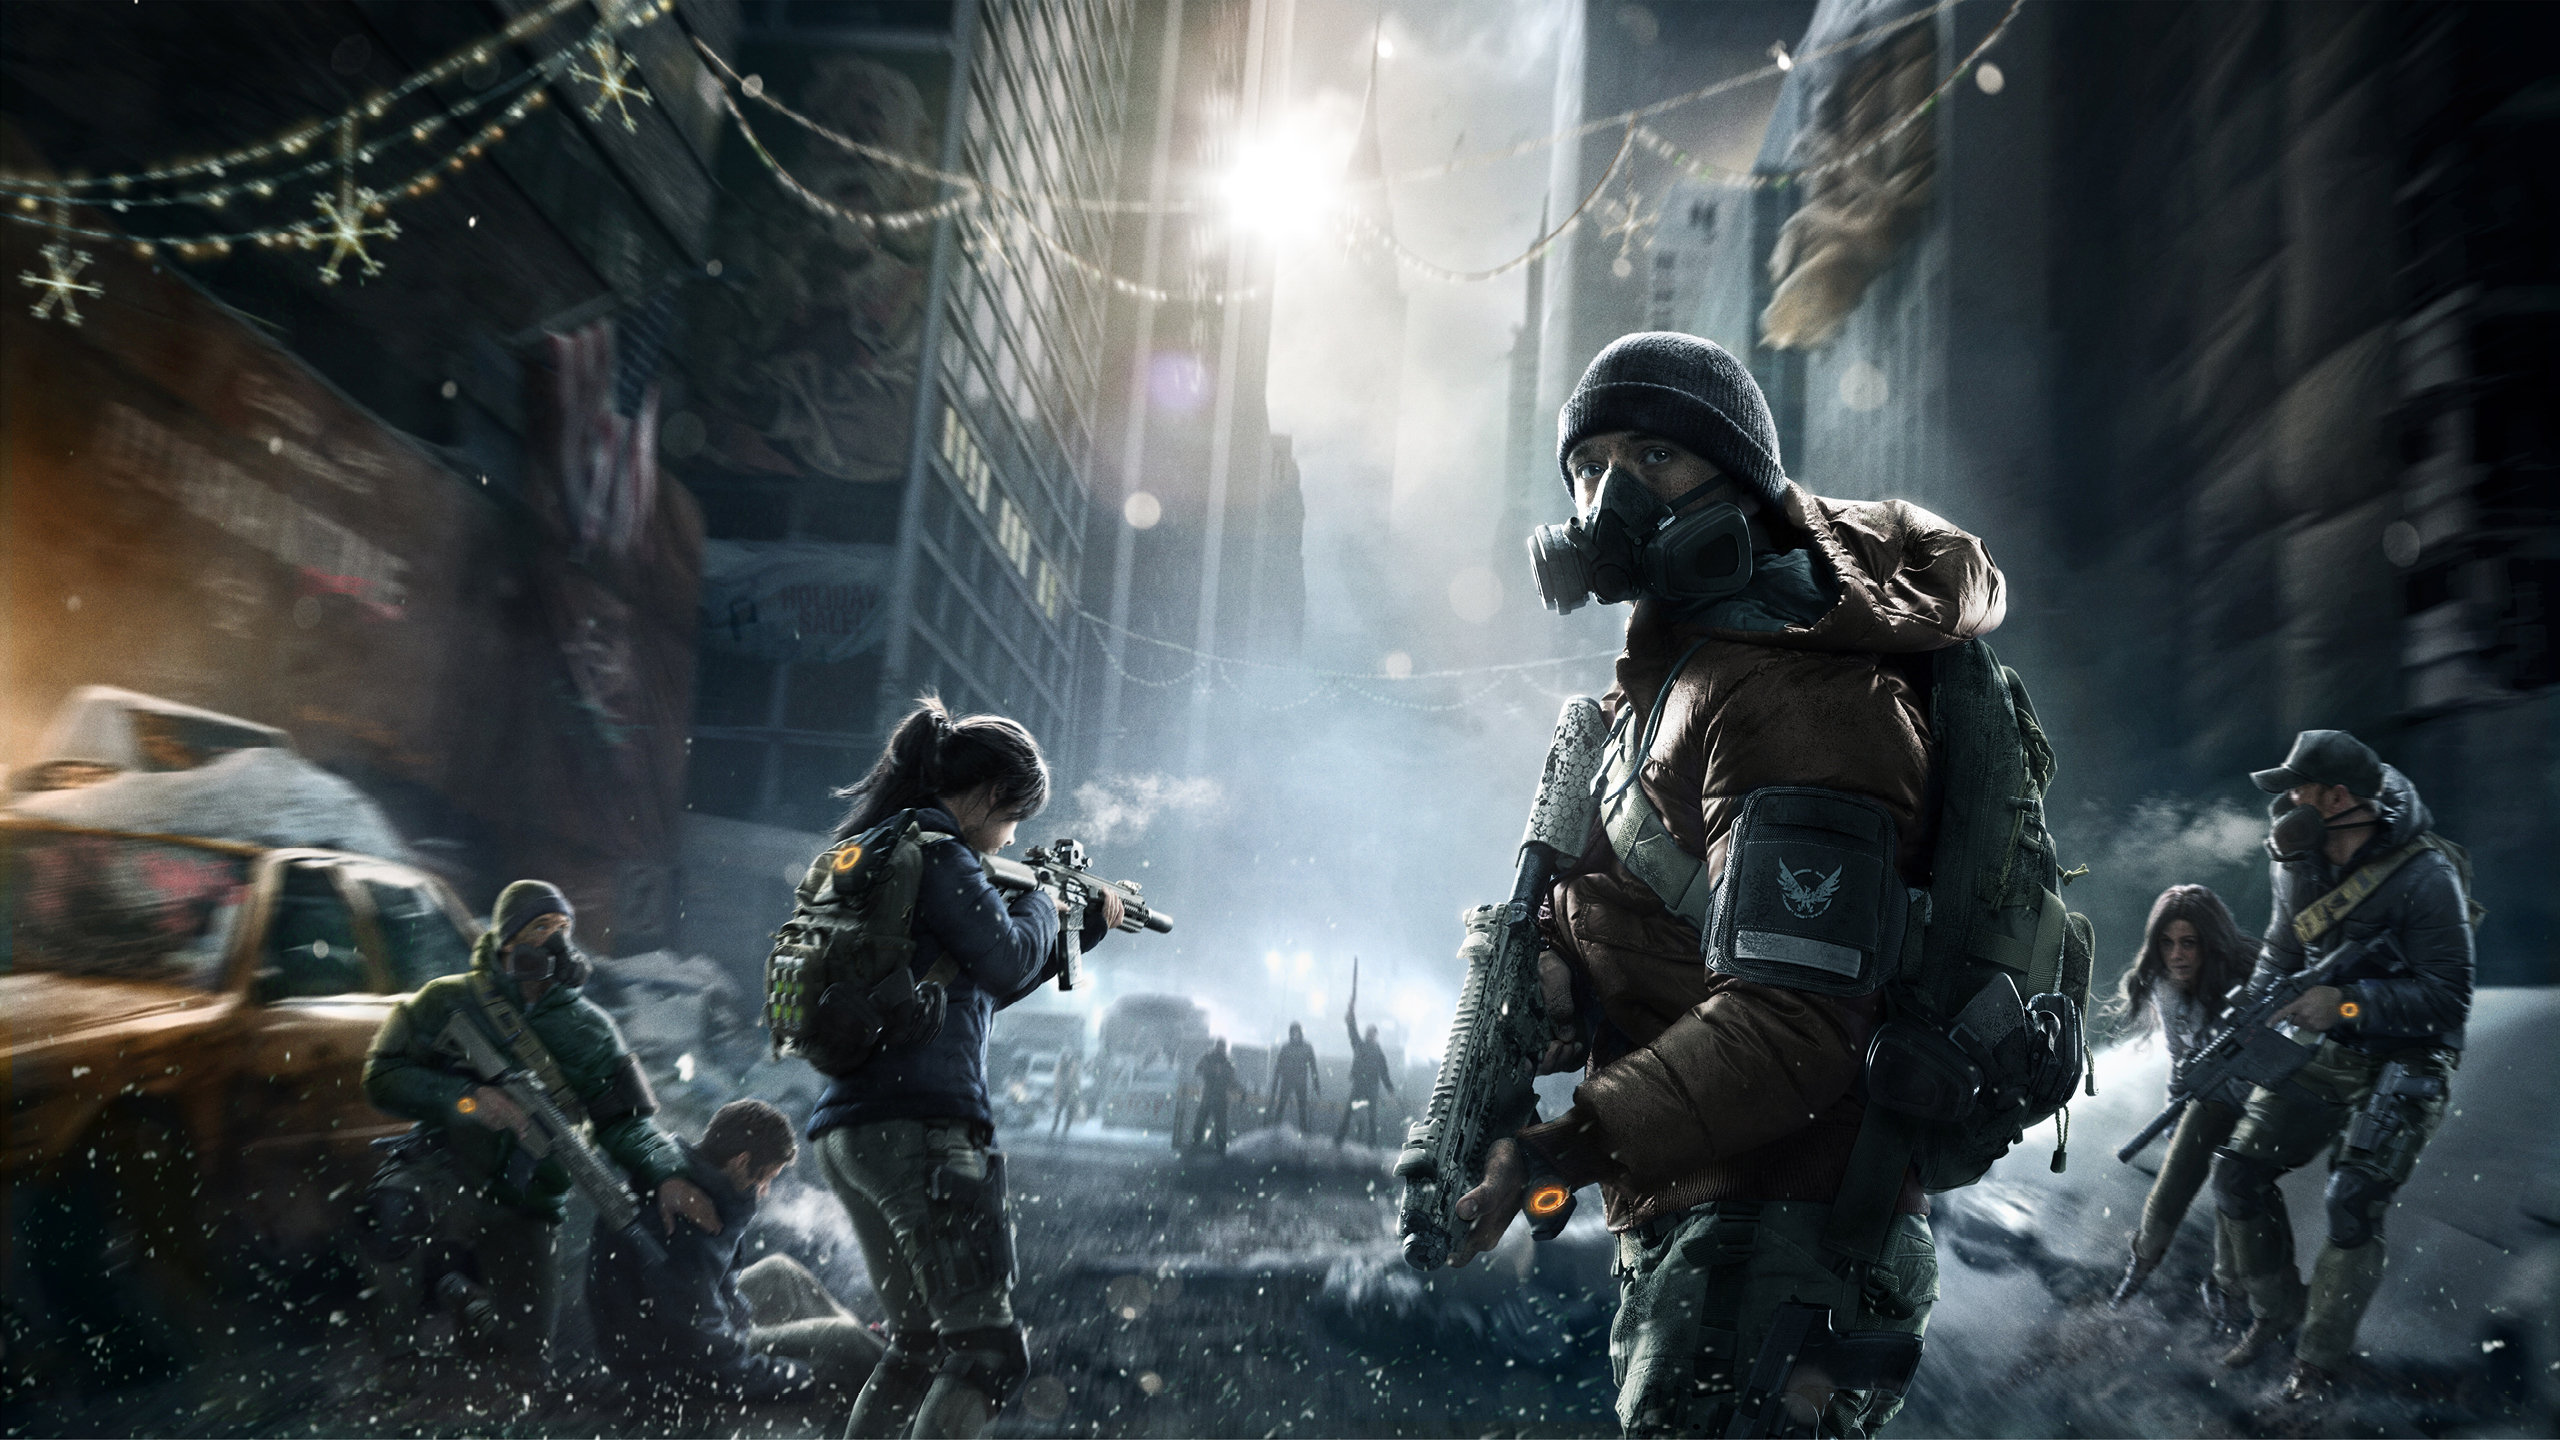 Free Download Tom Clancys The Division Wallpapers Hd Inspirationseekcom 2560x1440 For Your Desktop Mobile Tablet Explore 49 The Division Phone Wallpaper The Division Wallpaper 2560x1440 The Division 4k Wallpaper